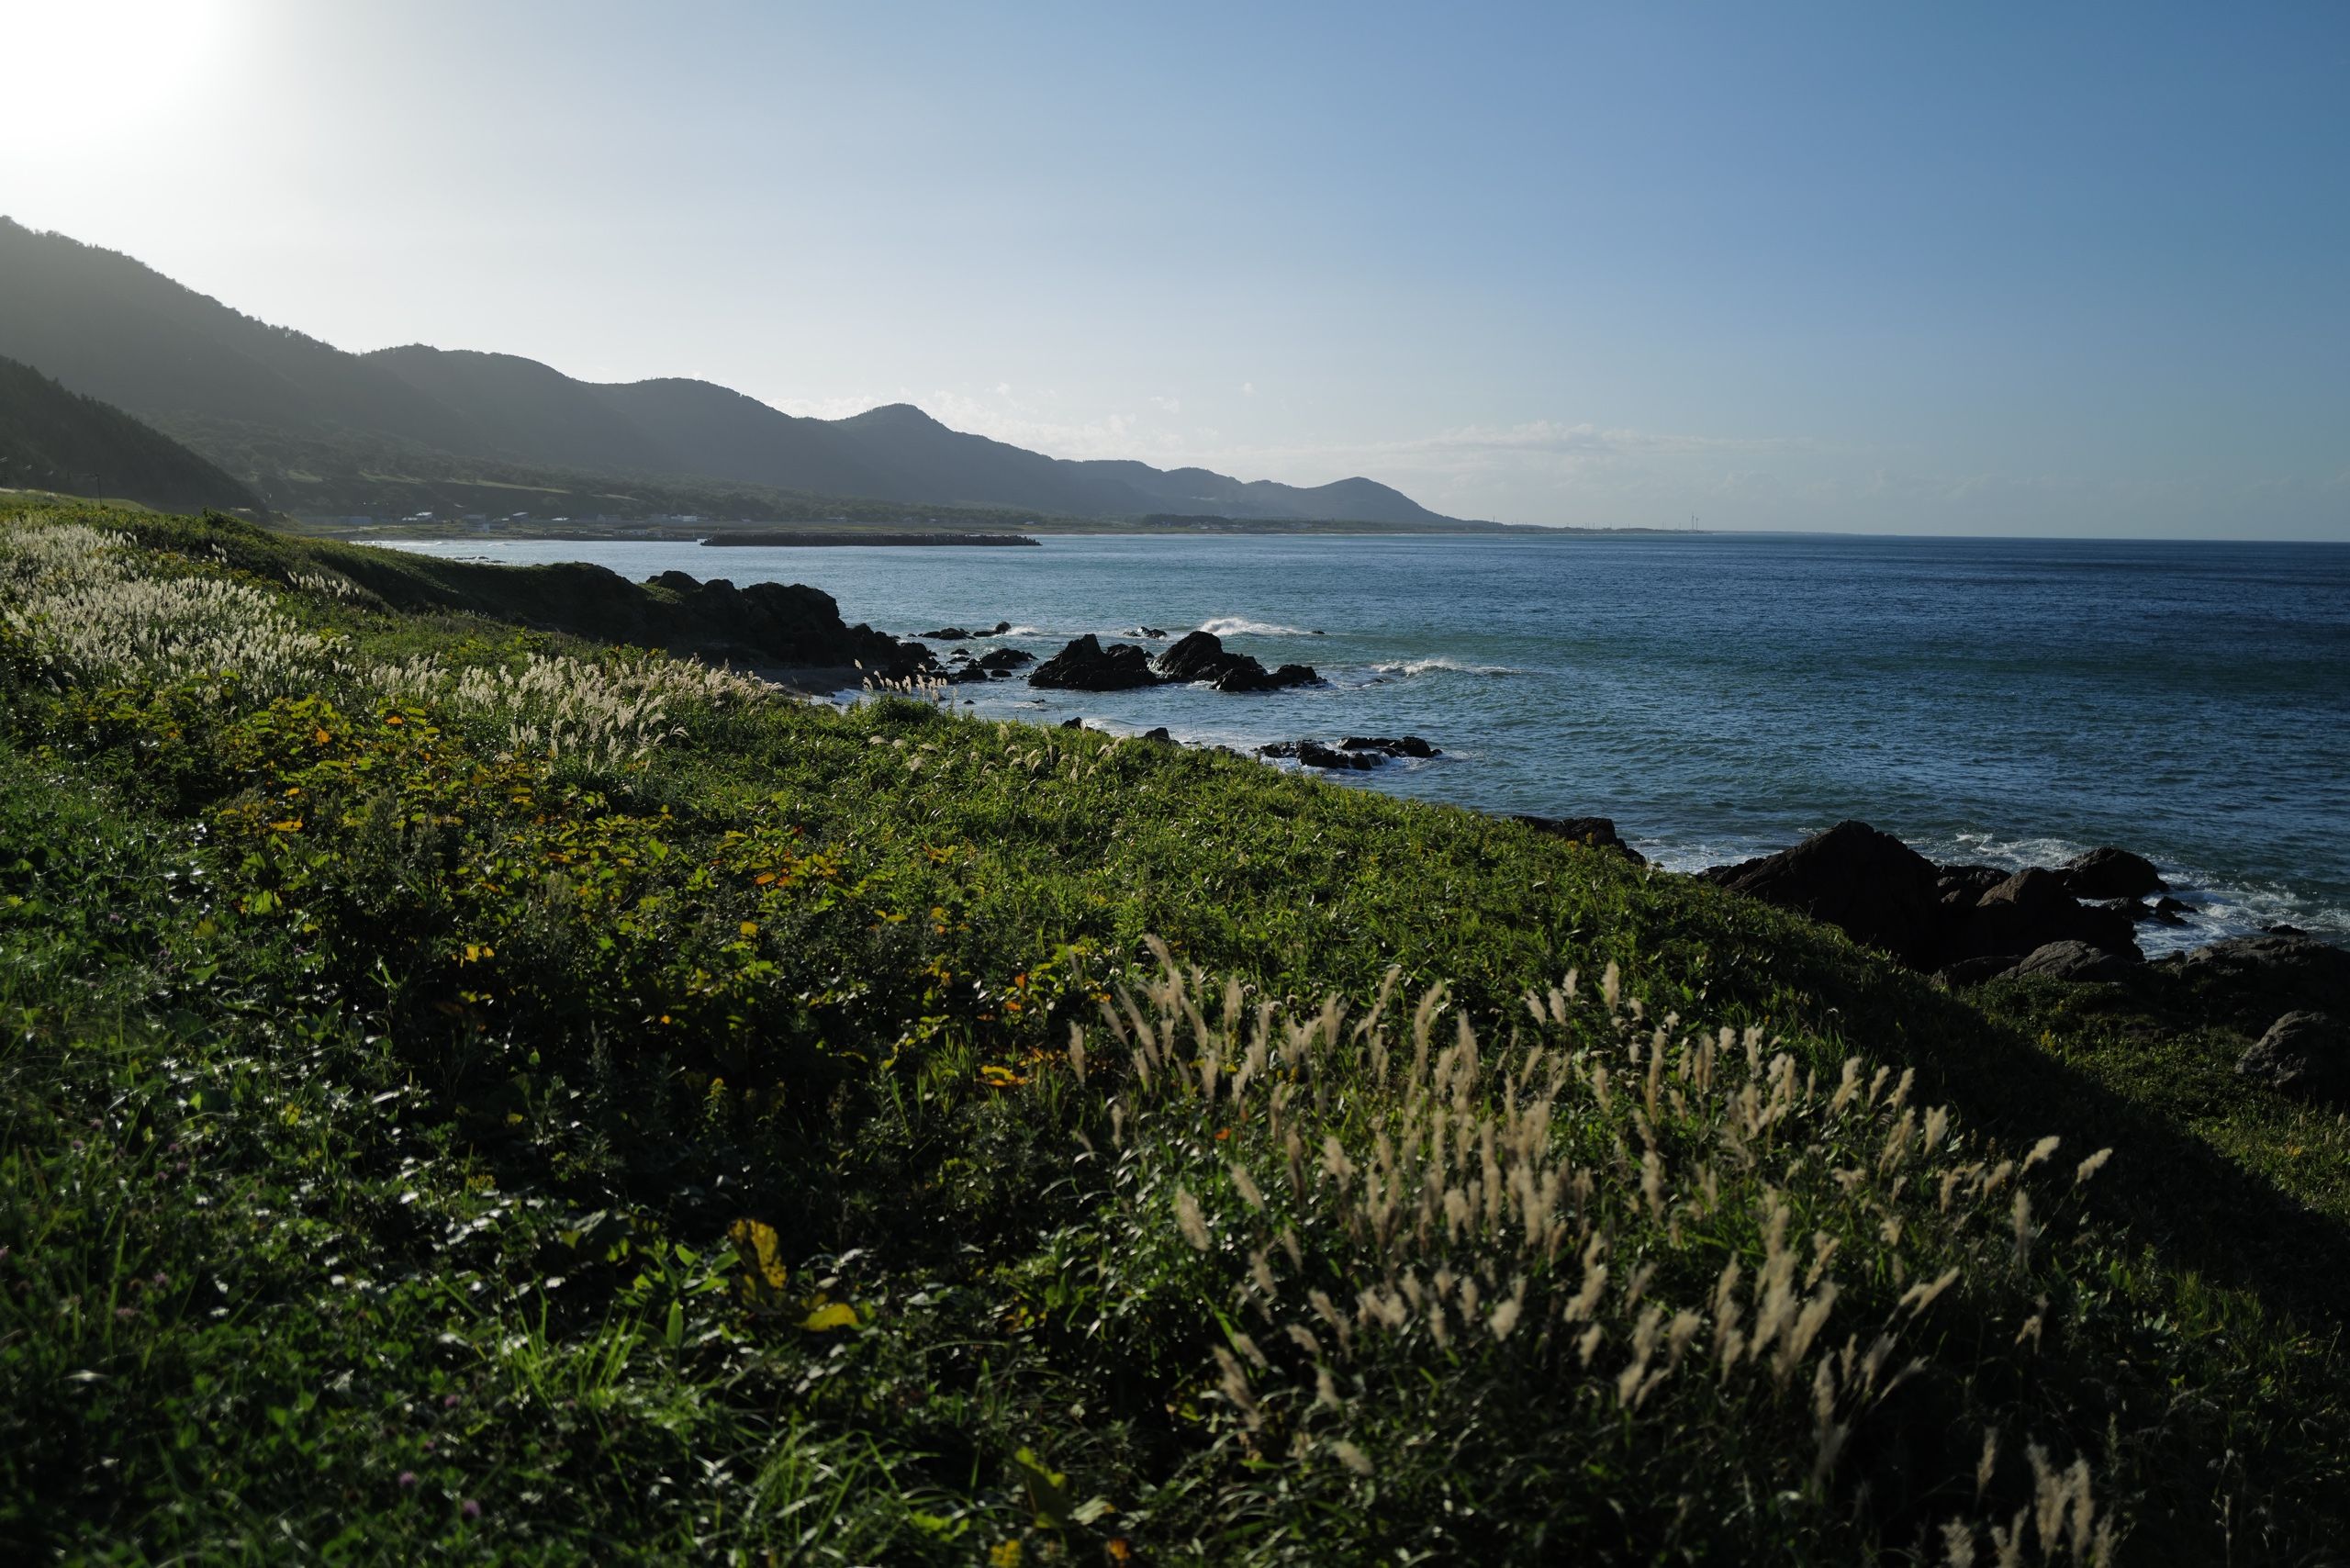 A rugged, hilly beach in the afternoon light